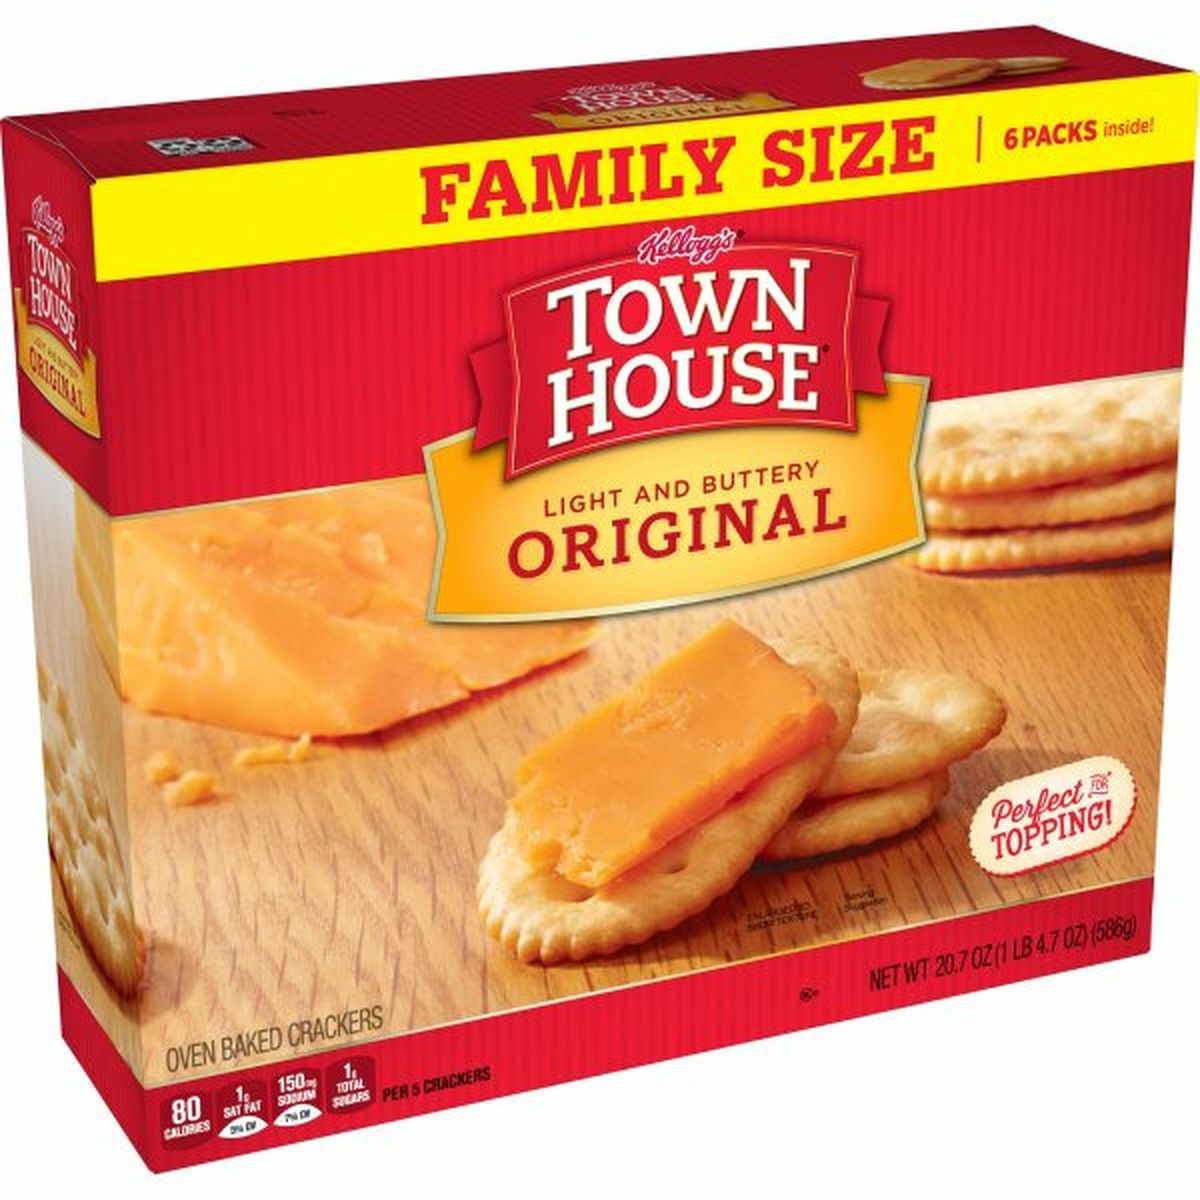 Calories in Kellogg's Town House Crackers Kellogg's Town House Crackers, Original, Family Size, Snacks with Cheese, 20.7oz